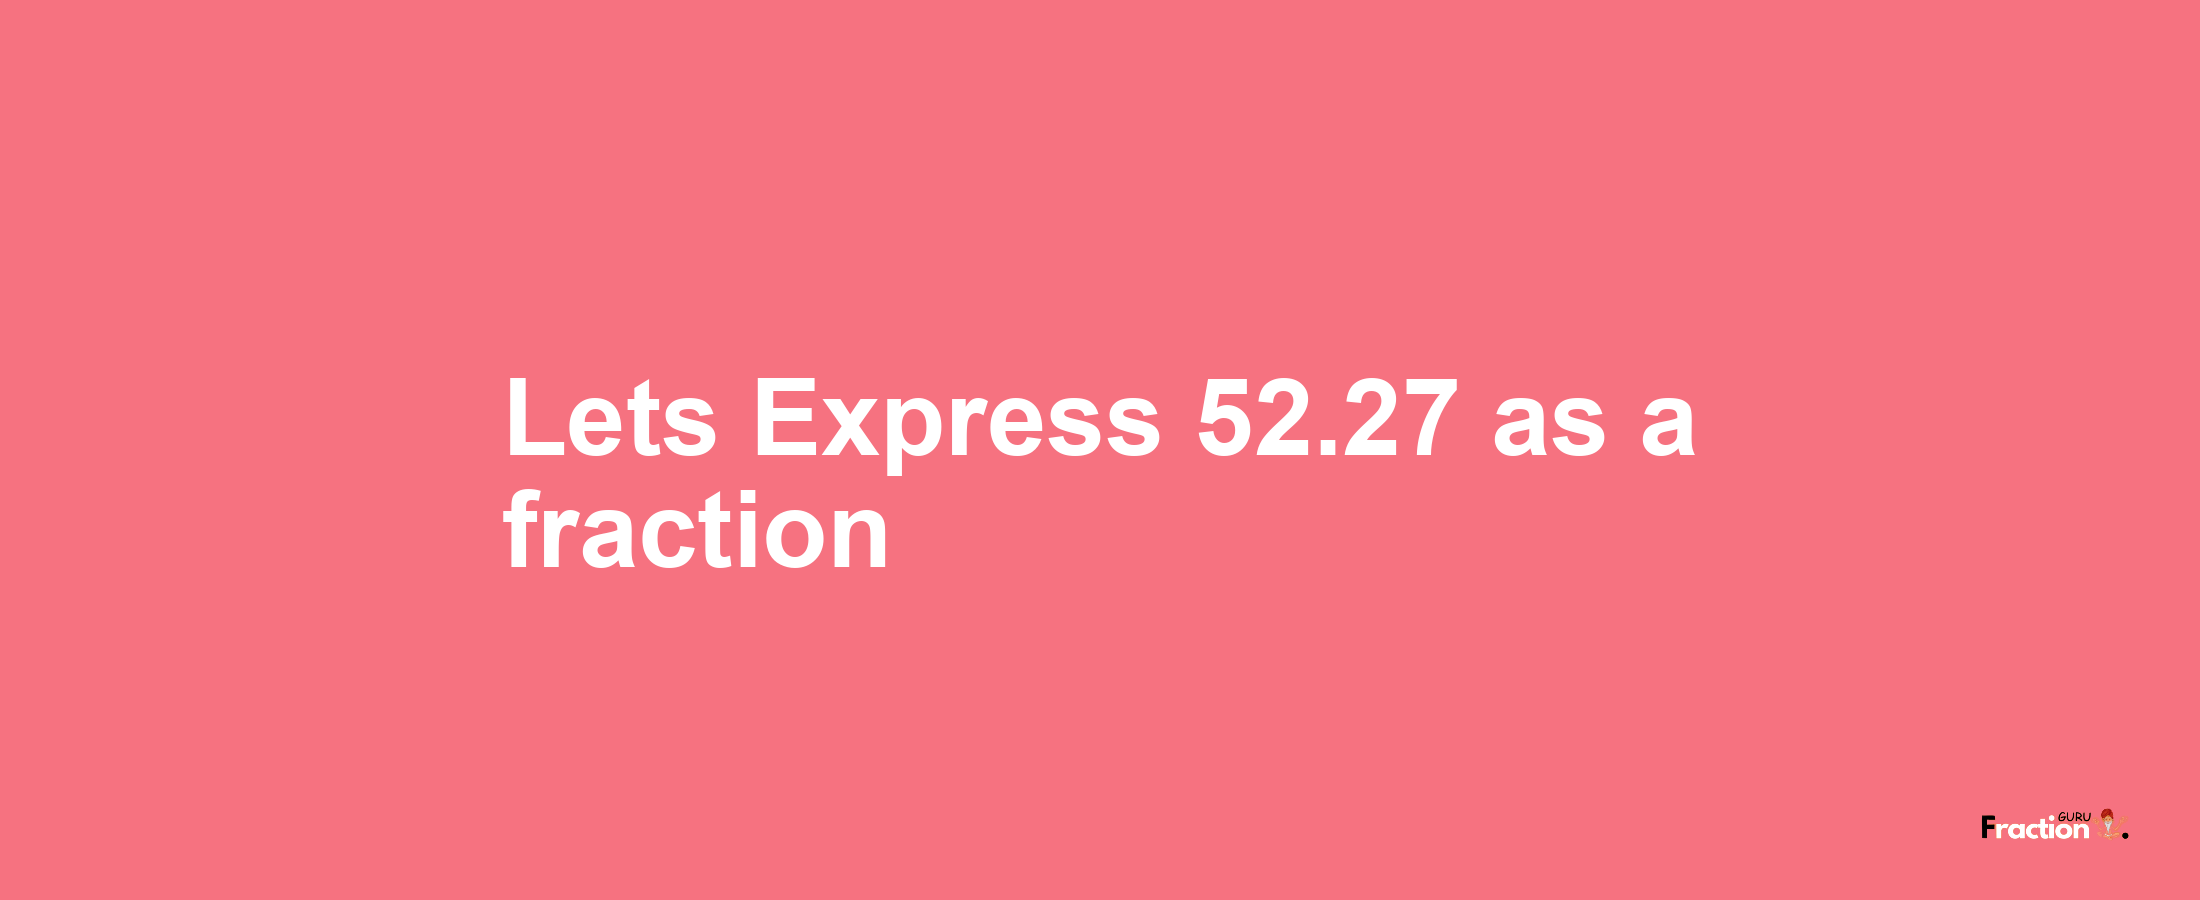 Lets Express 52.27 as afraction